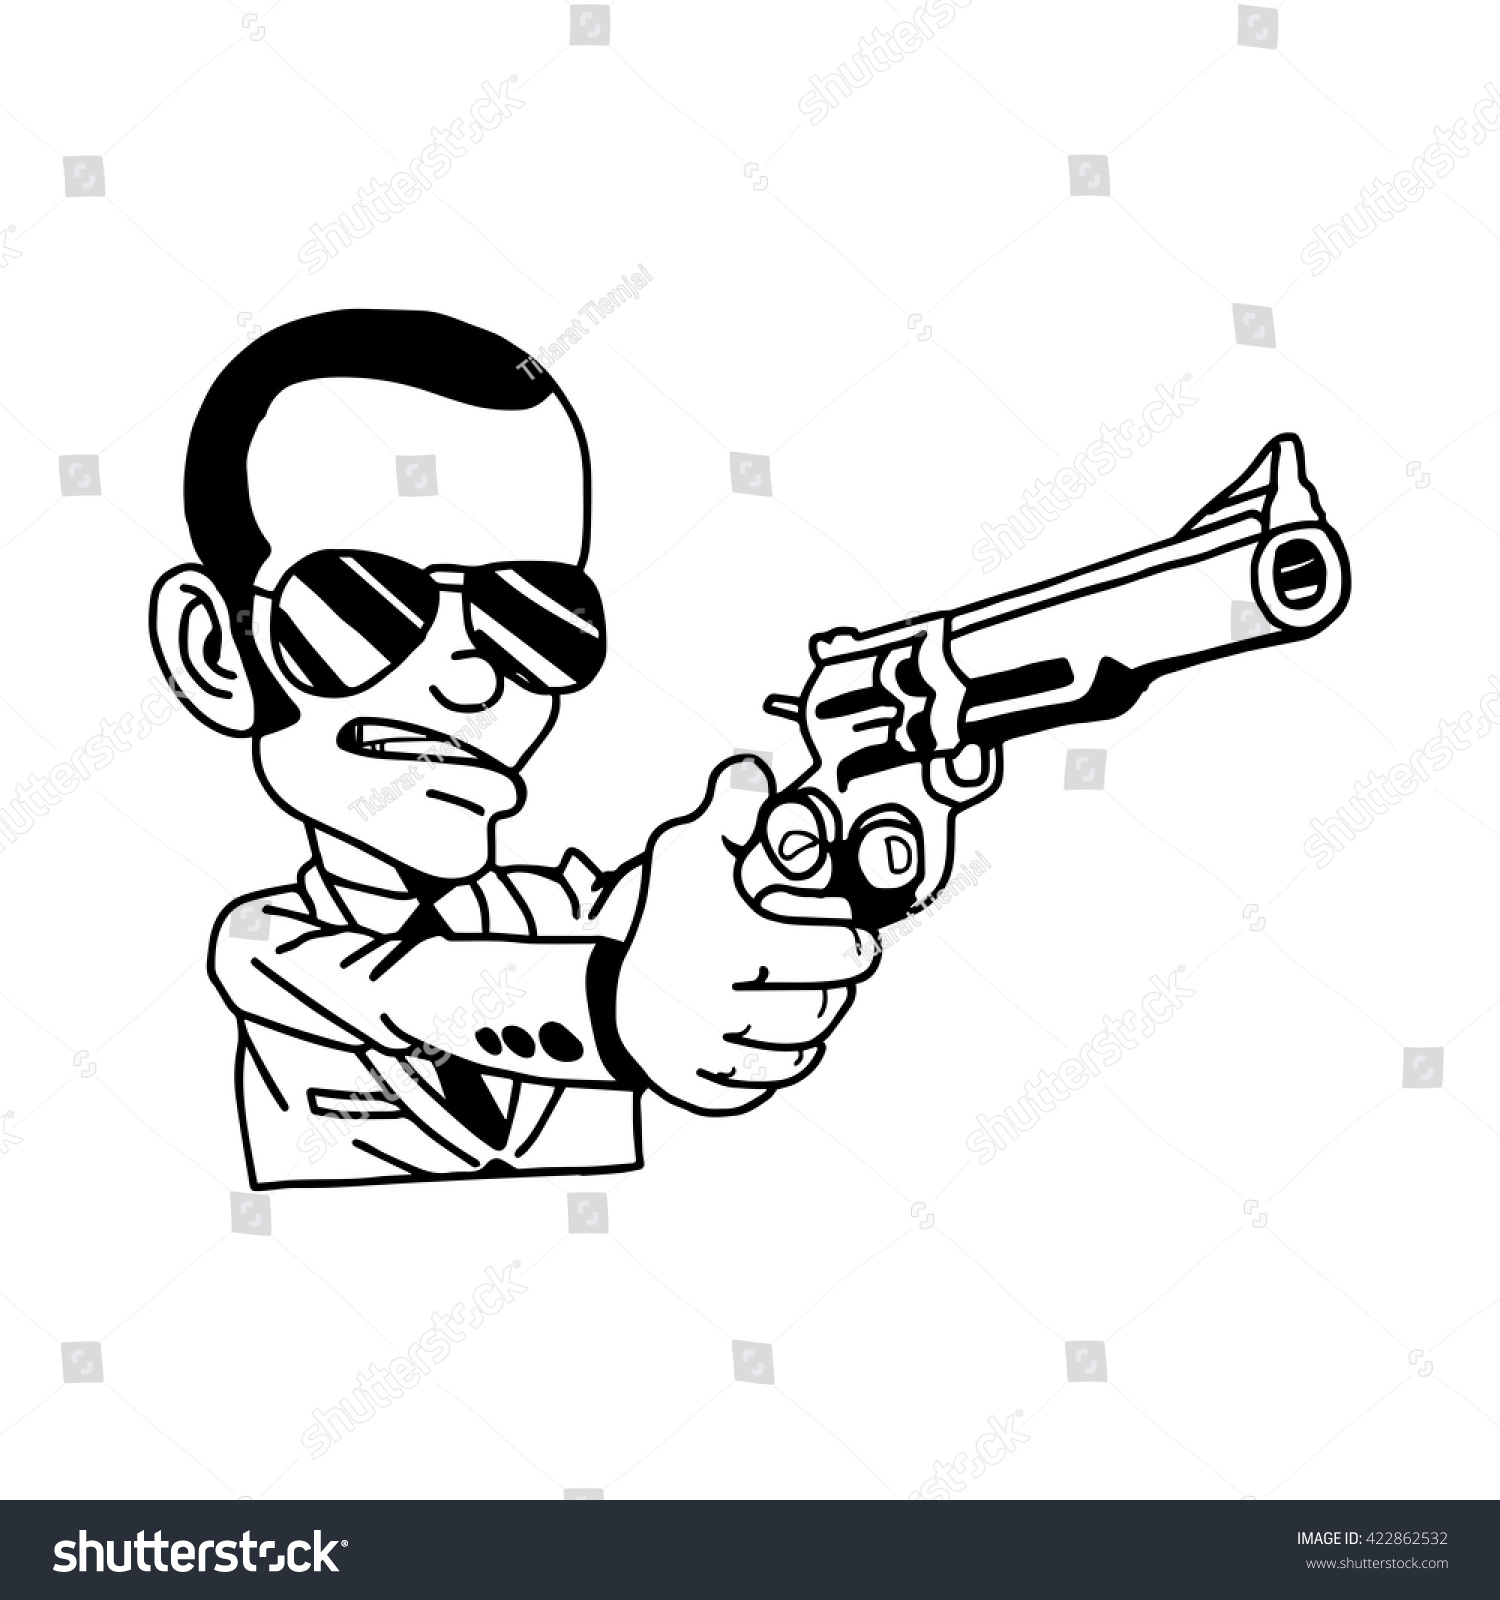 Illustration Vector Hand Drawn Doodle Of Man In Suit Holding Gun